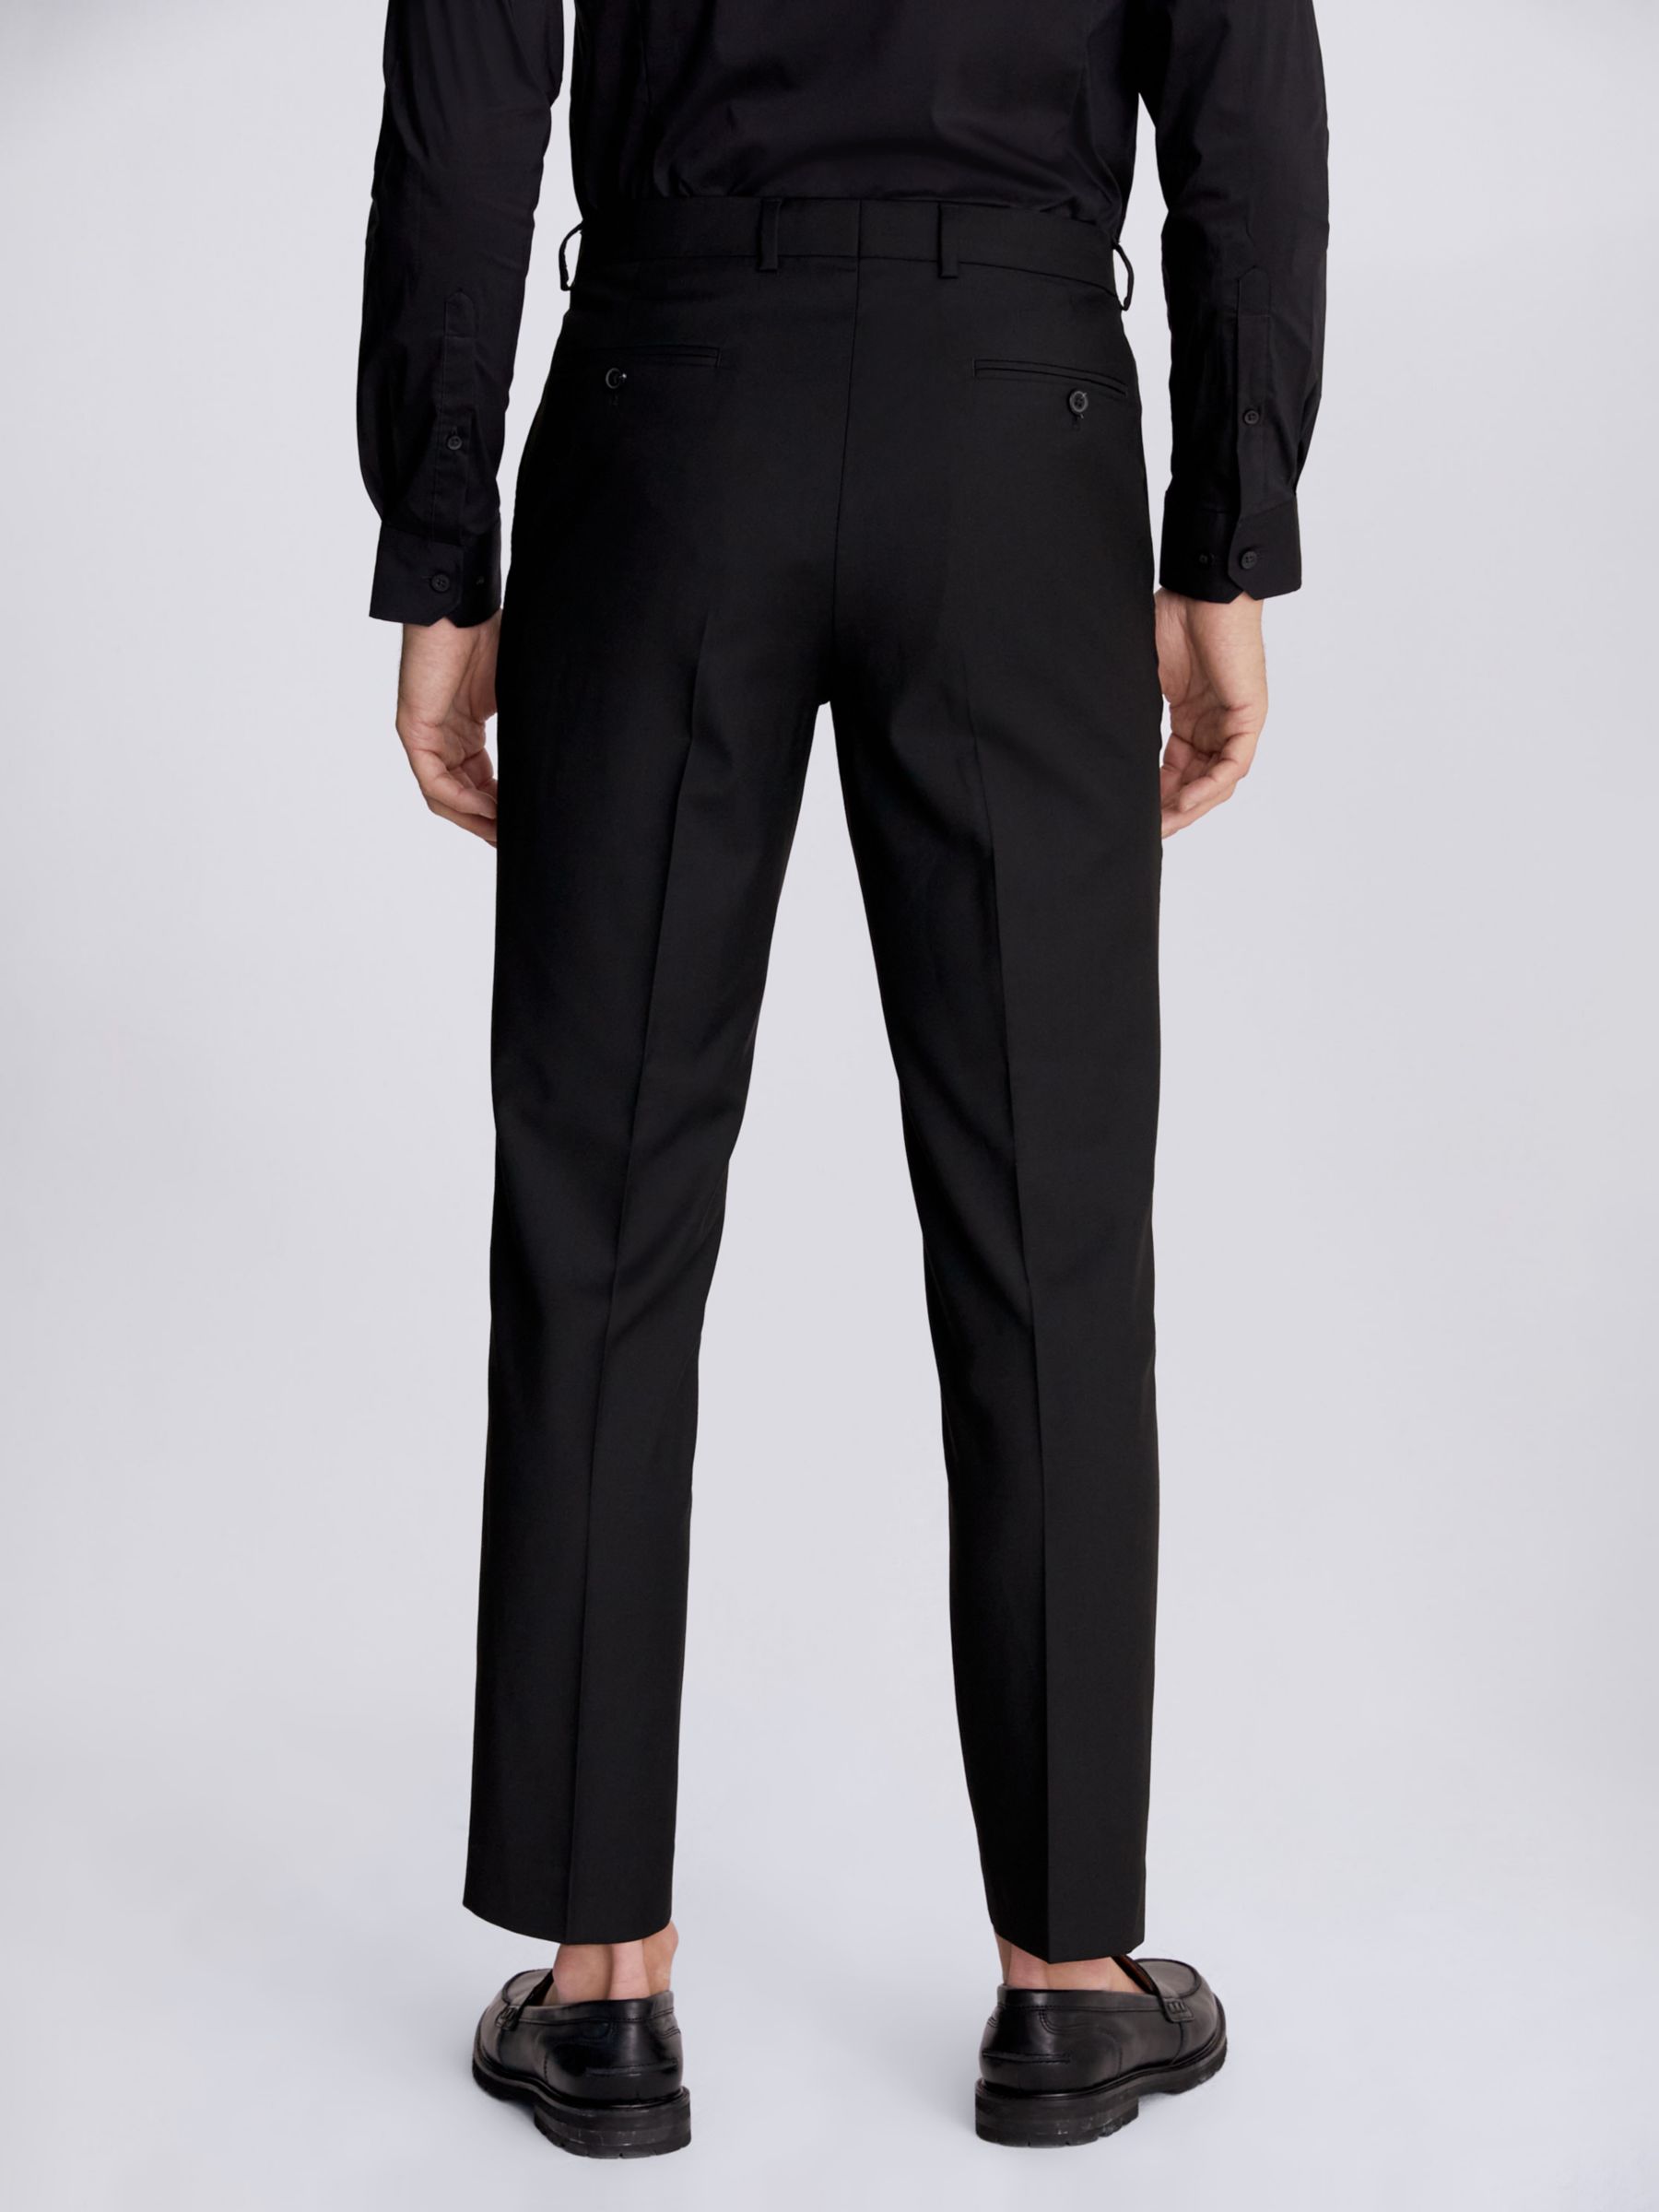 Moss Regular Fit Stretch Suit Trousers, Black, 28S